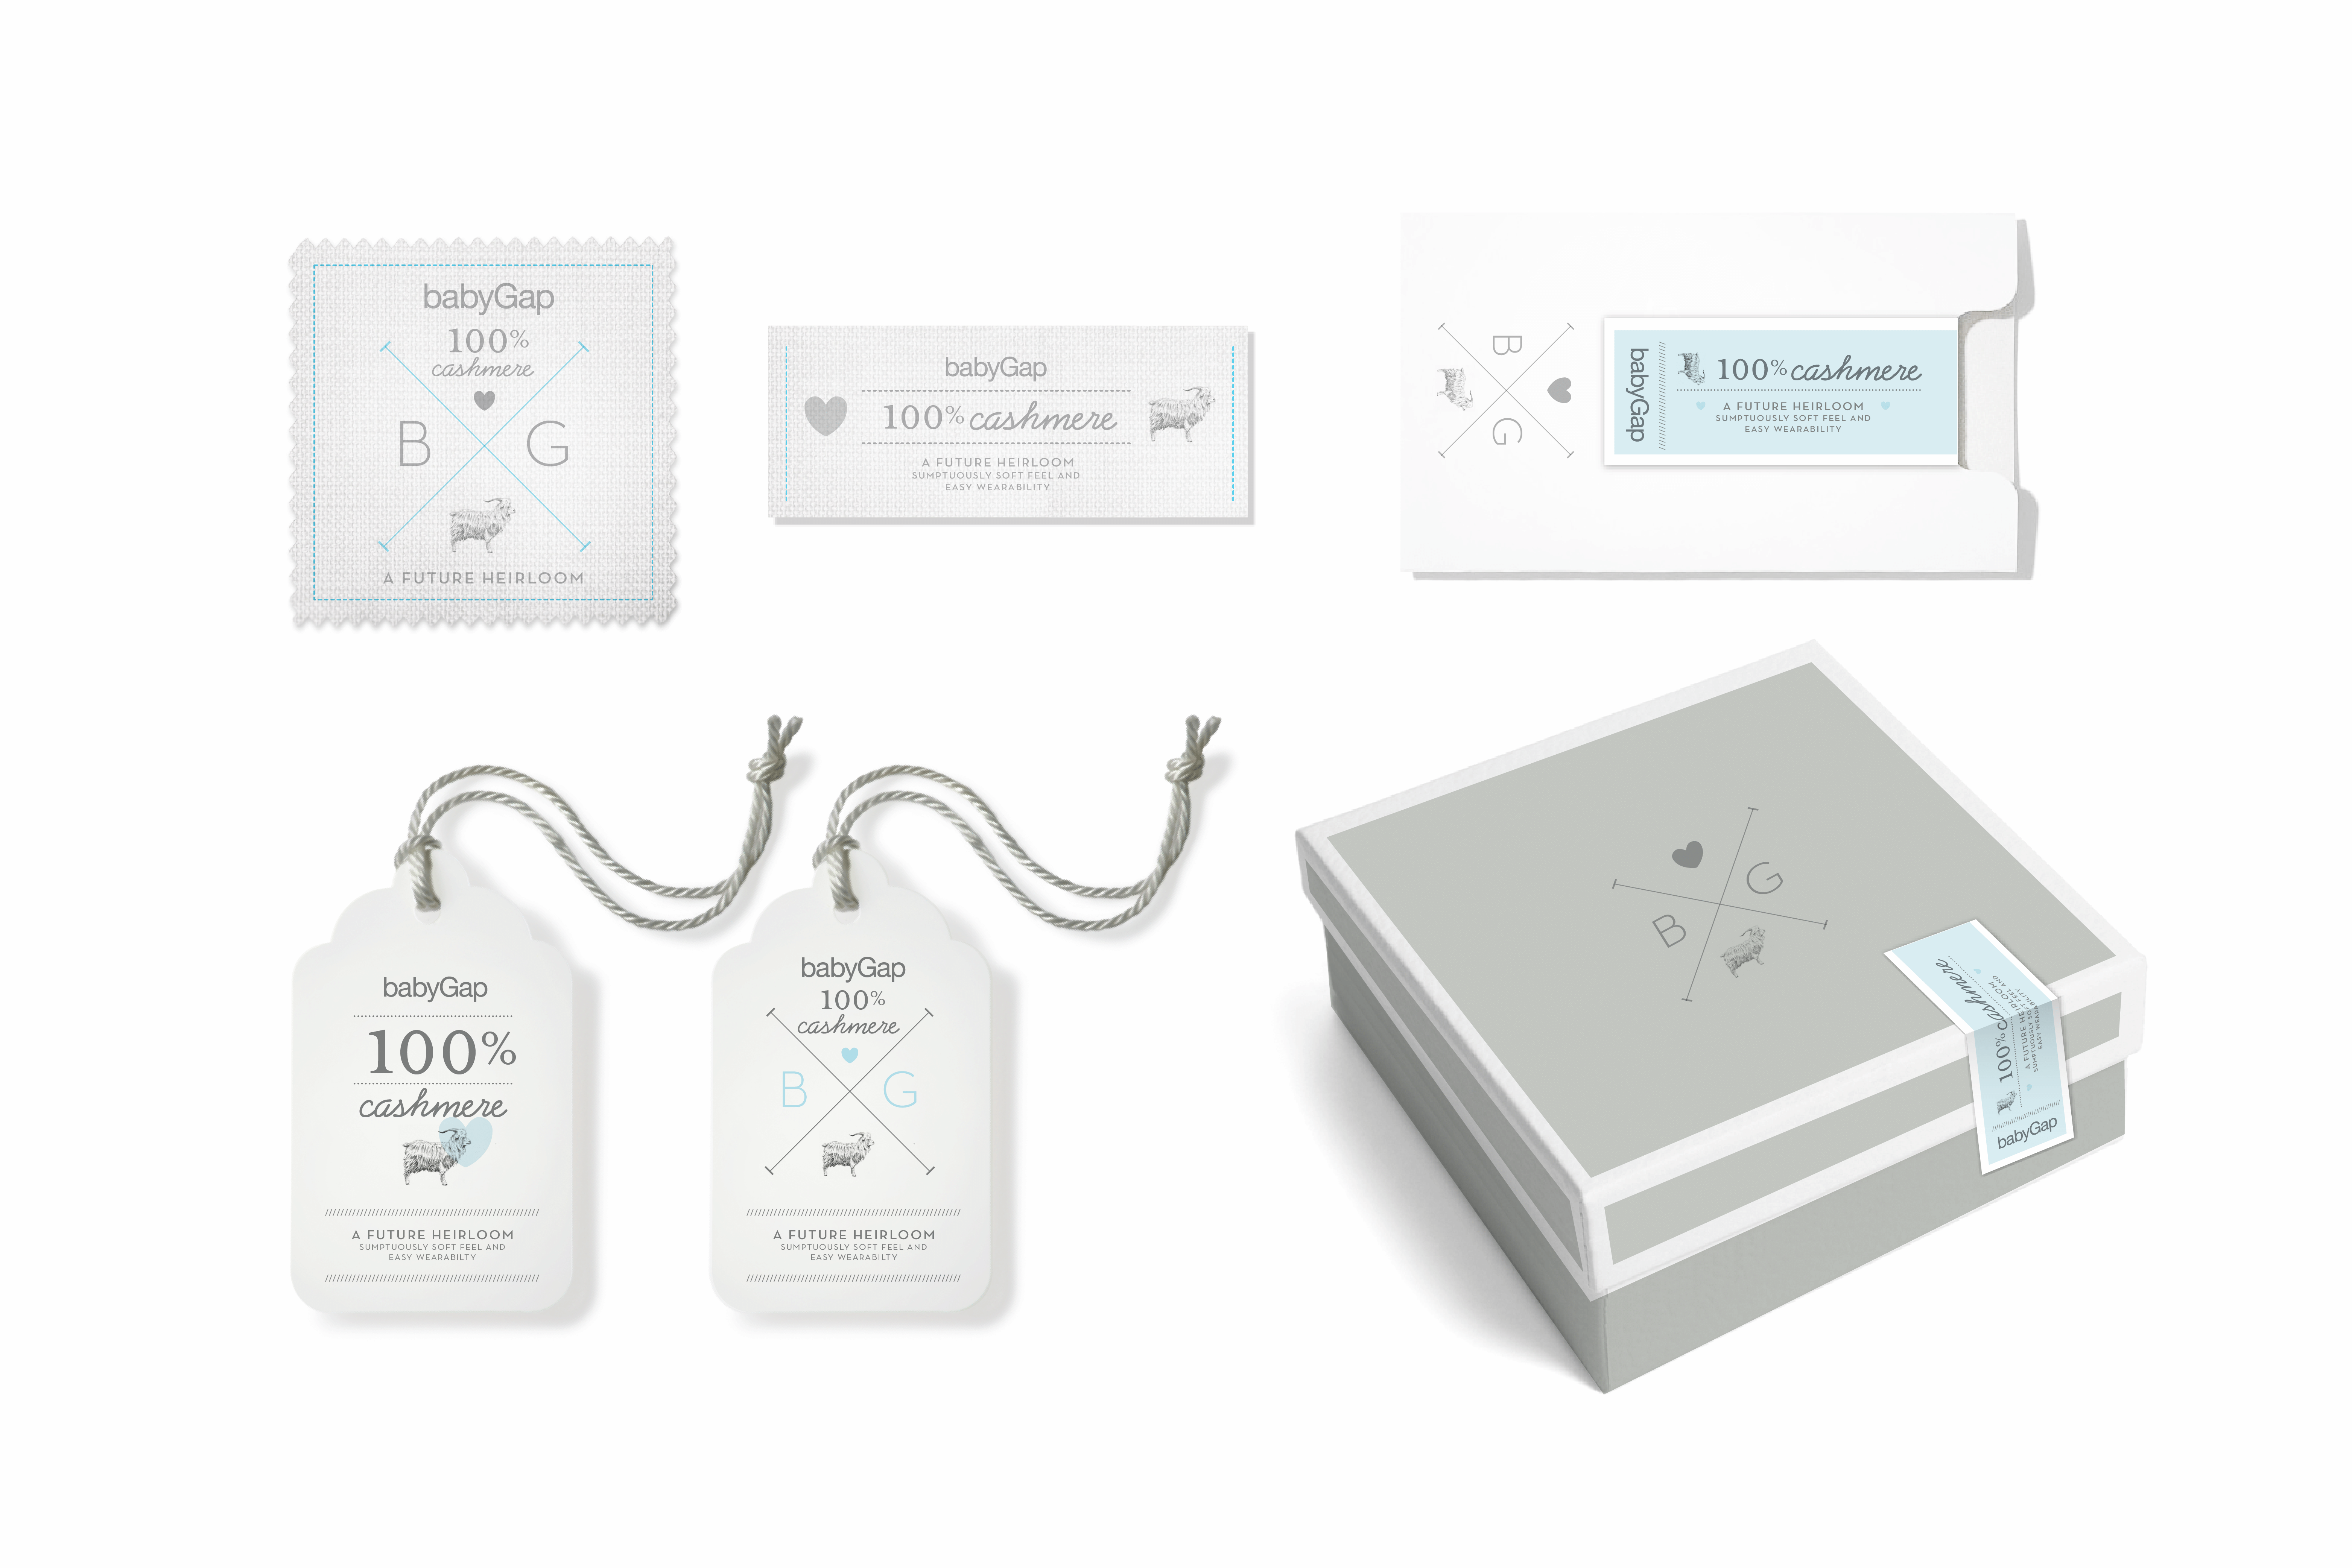 Baby Gap cashmere packaging.